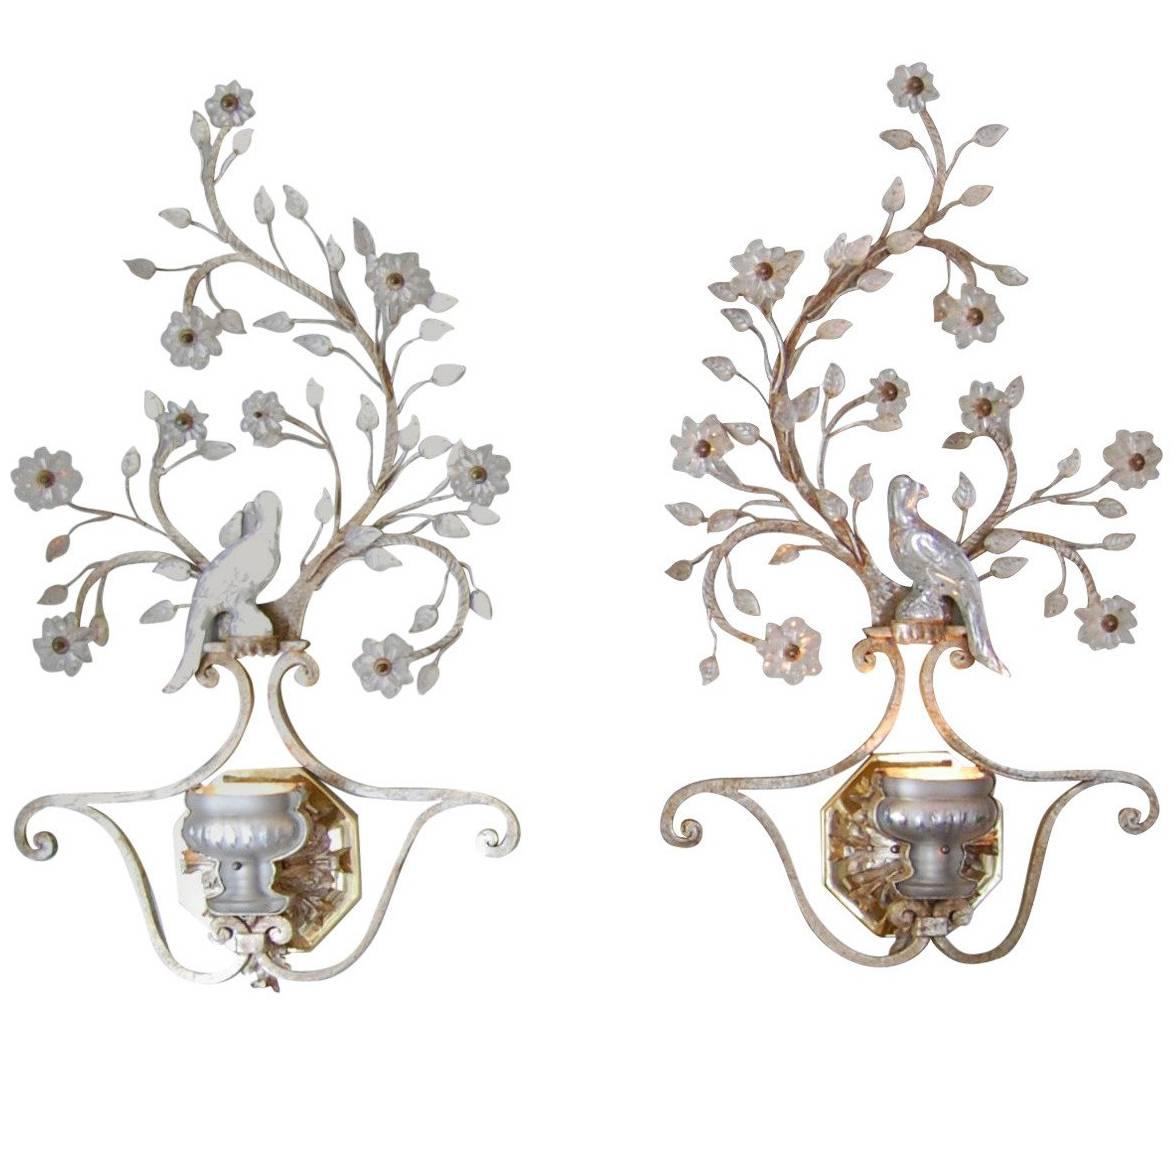 Pair of 1930s French Iron and Crystal Wall Sconces